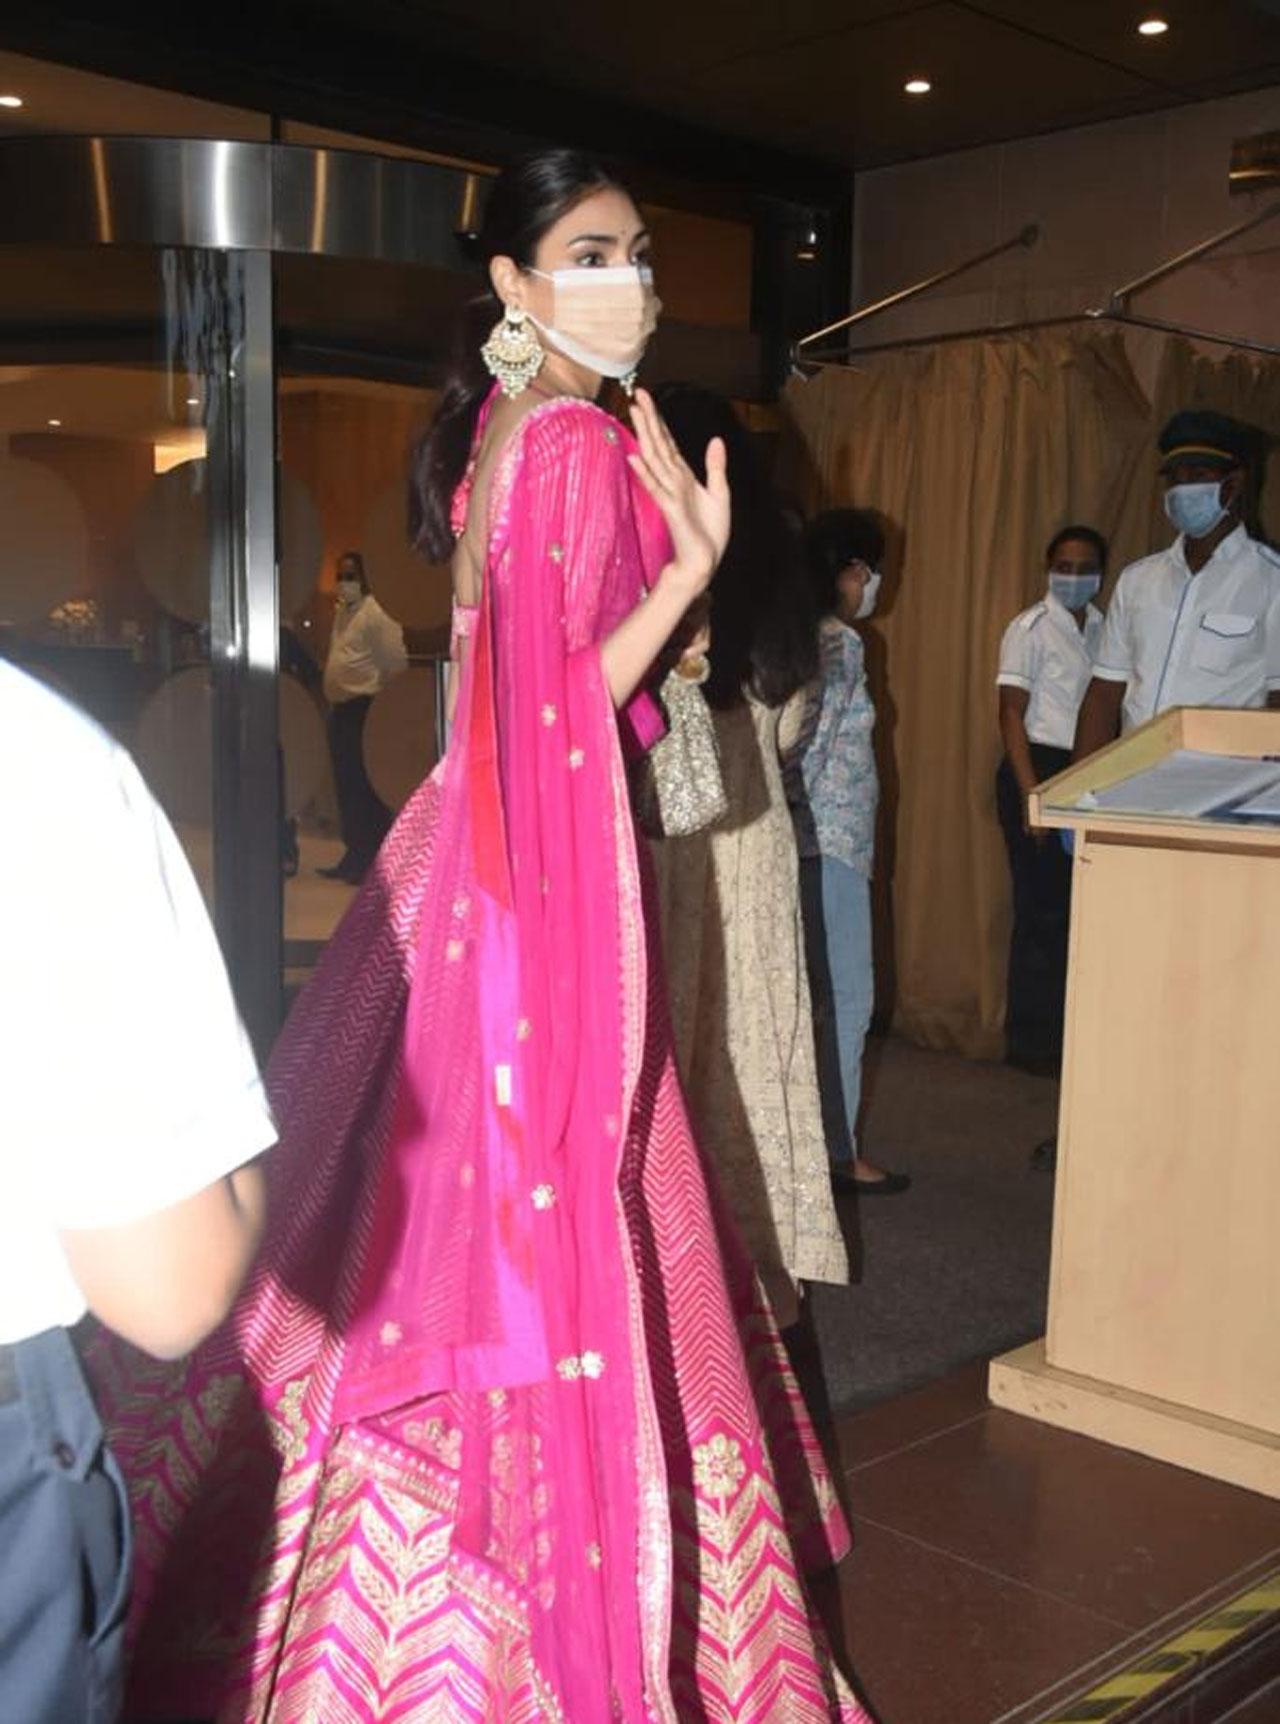 Athiya Shetty was also spotted at the Baaraat in a ravishing Pink saree. She's a close friend of the bride-to-be Anushka Ranjan.